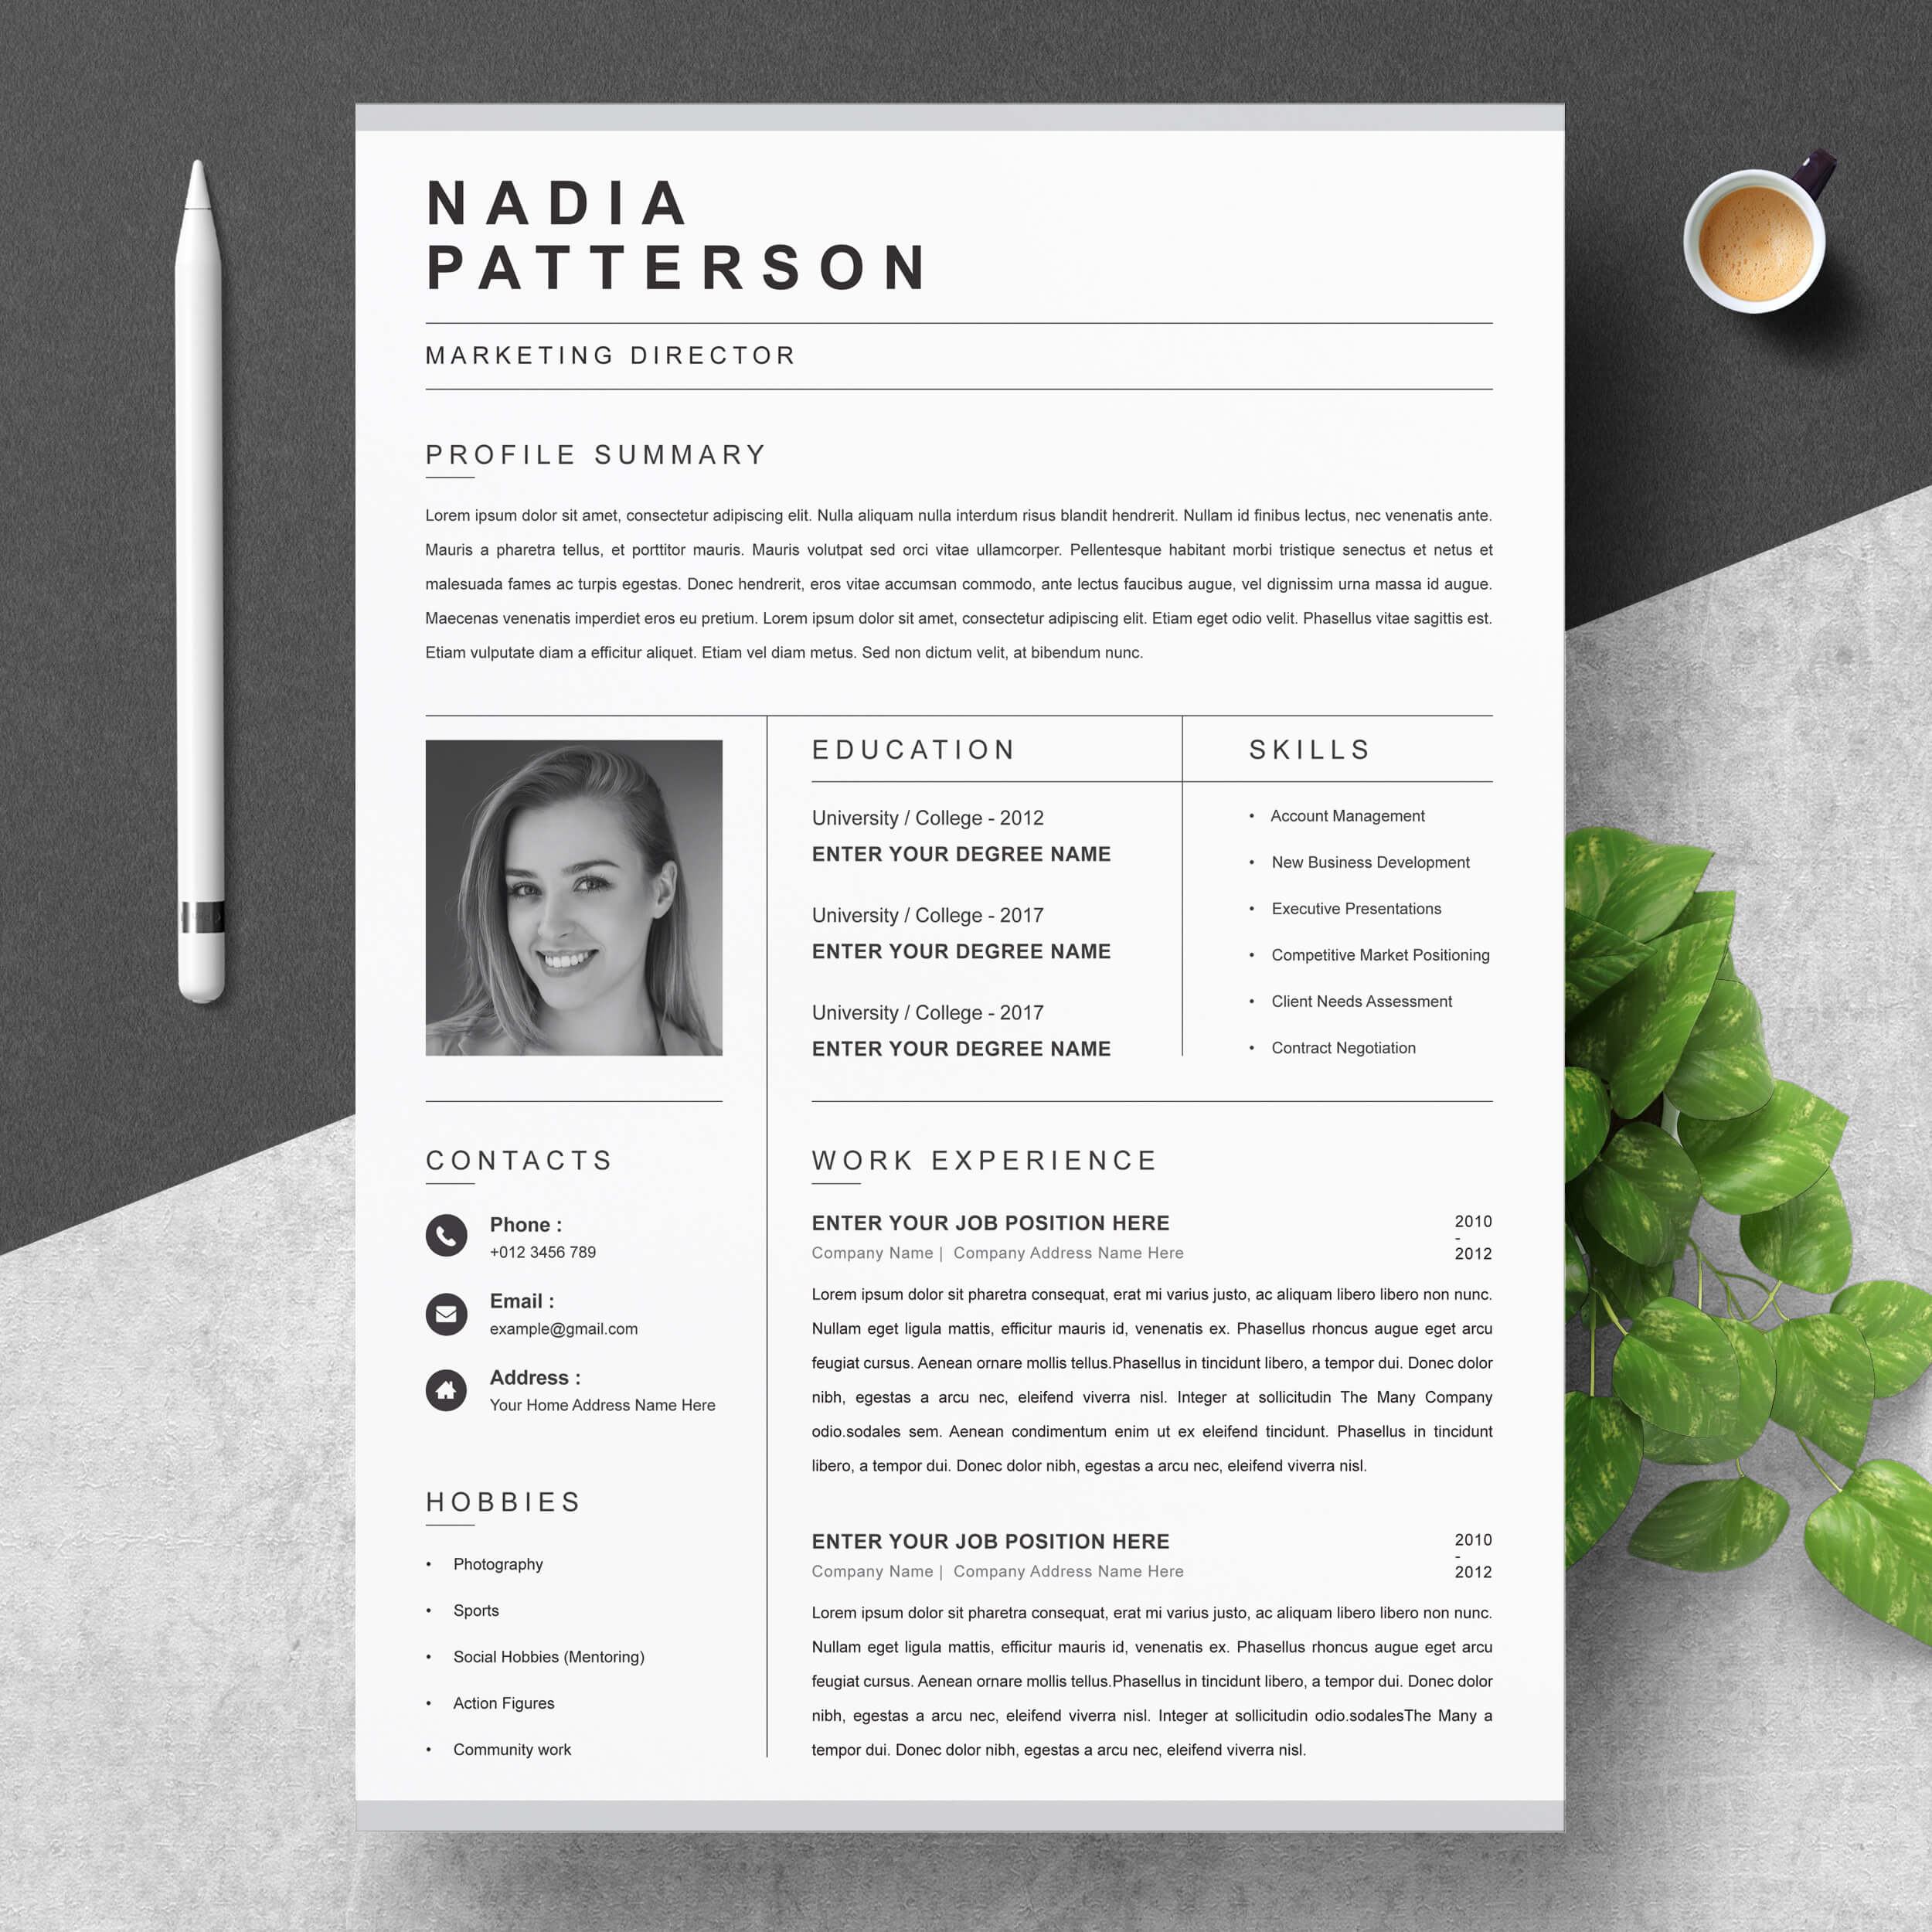 Marketing Director CV Template | Professional Resume | CV Template cover image.